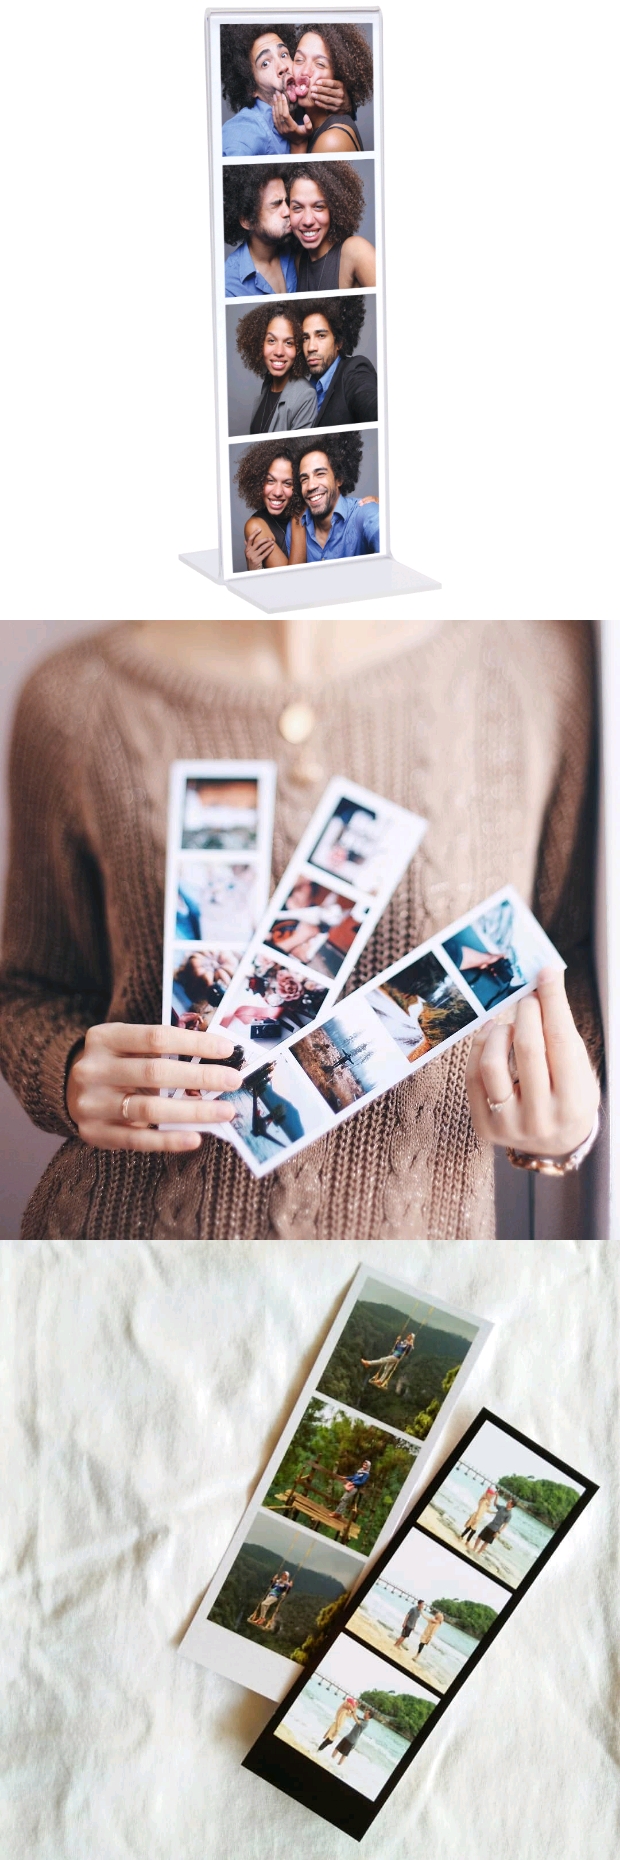 claire somers add cute polaroid pictures ideas photo